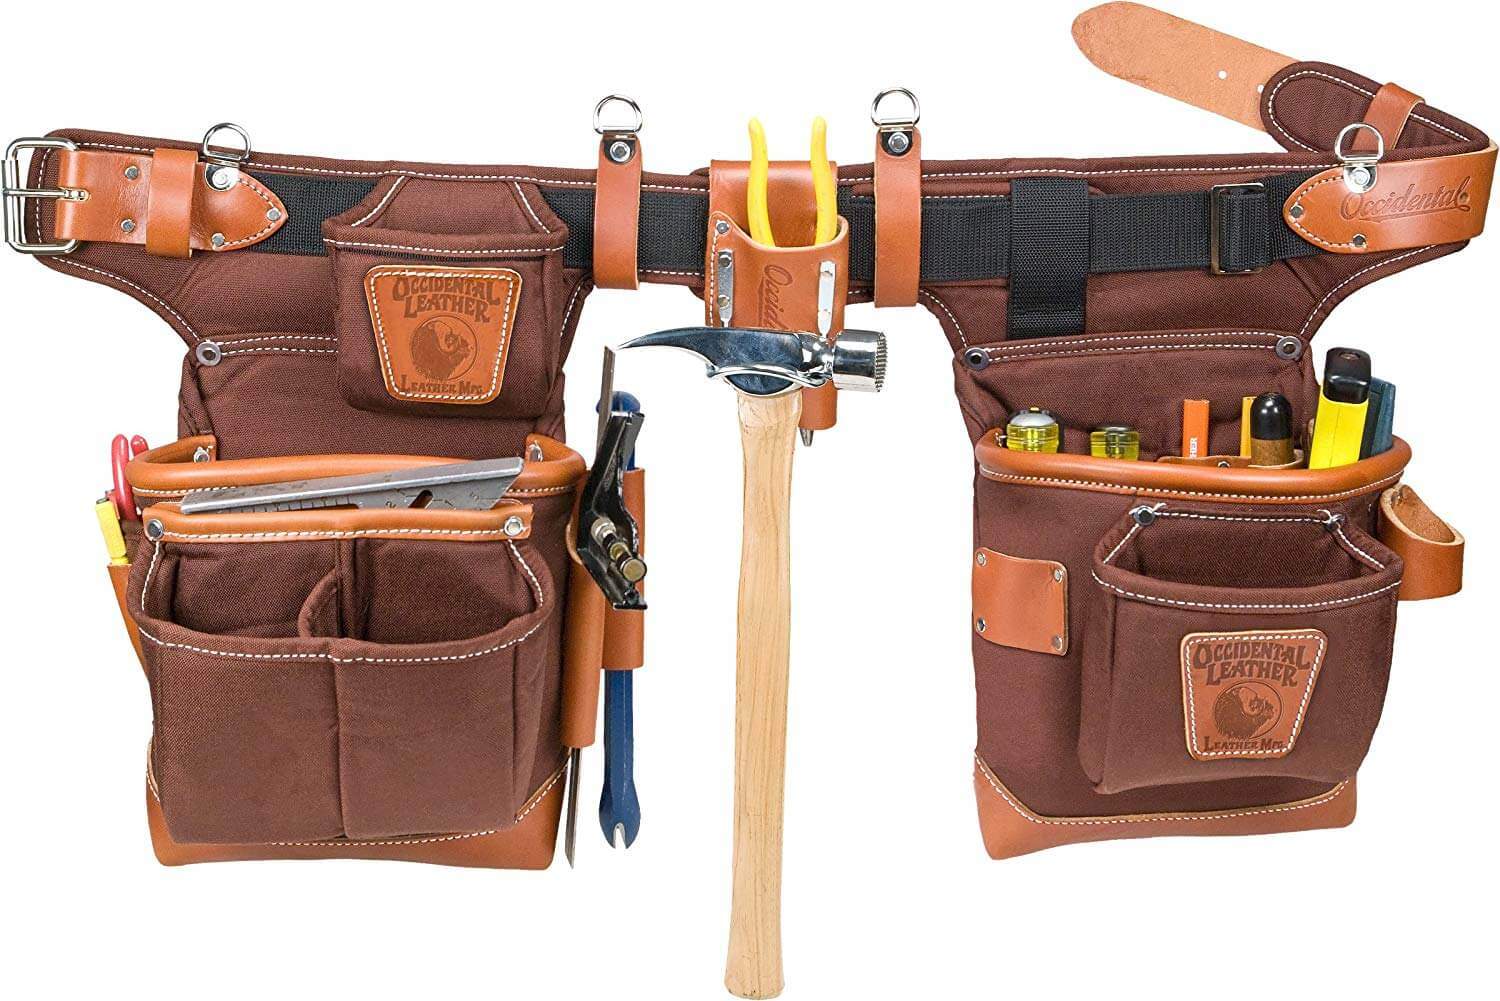 Occidental Leather 9855 Electrician Tool Belt